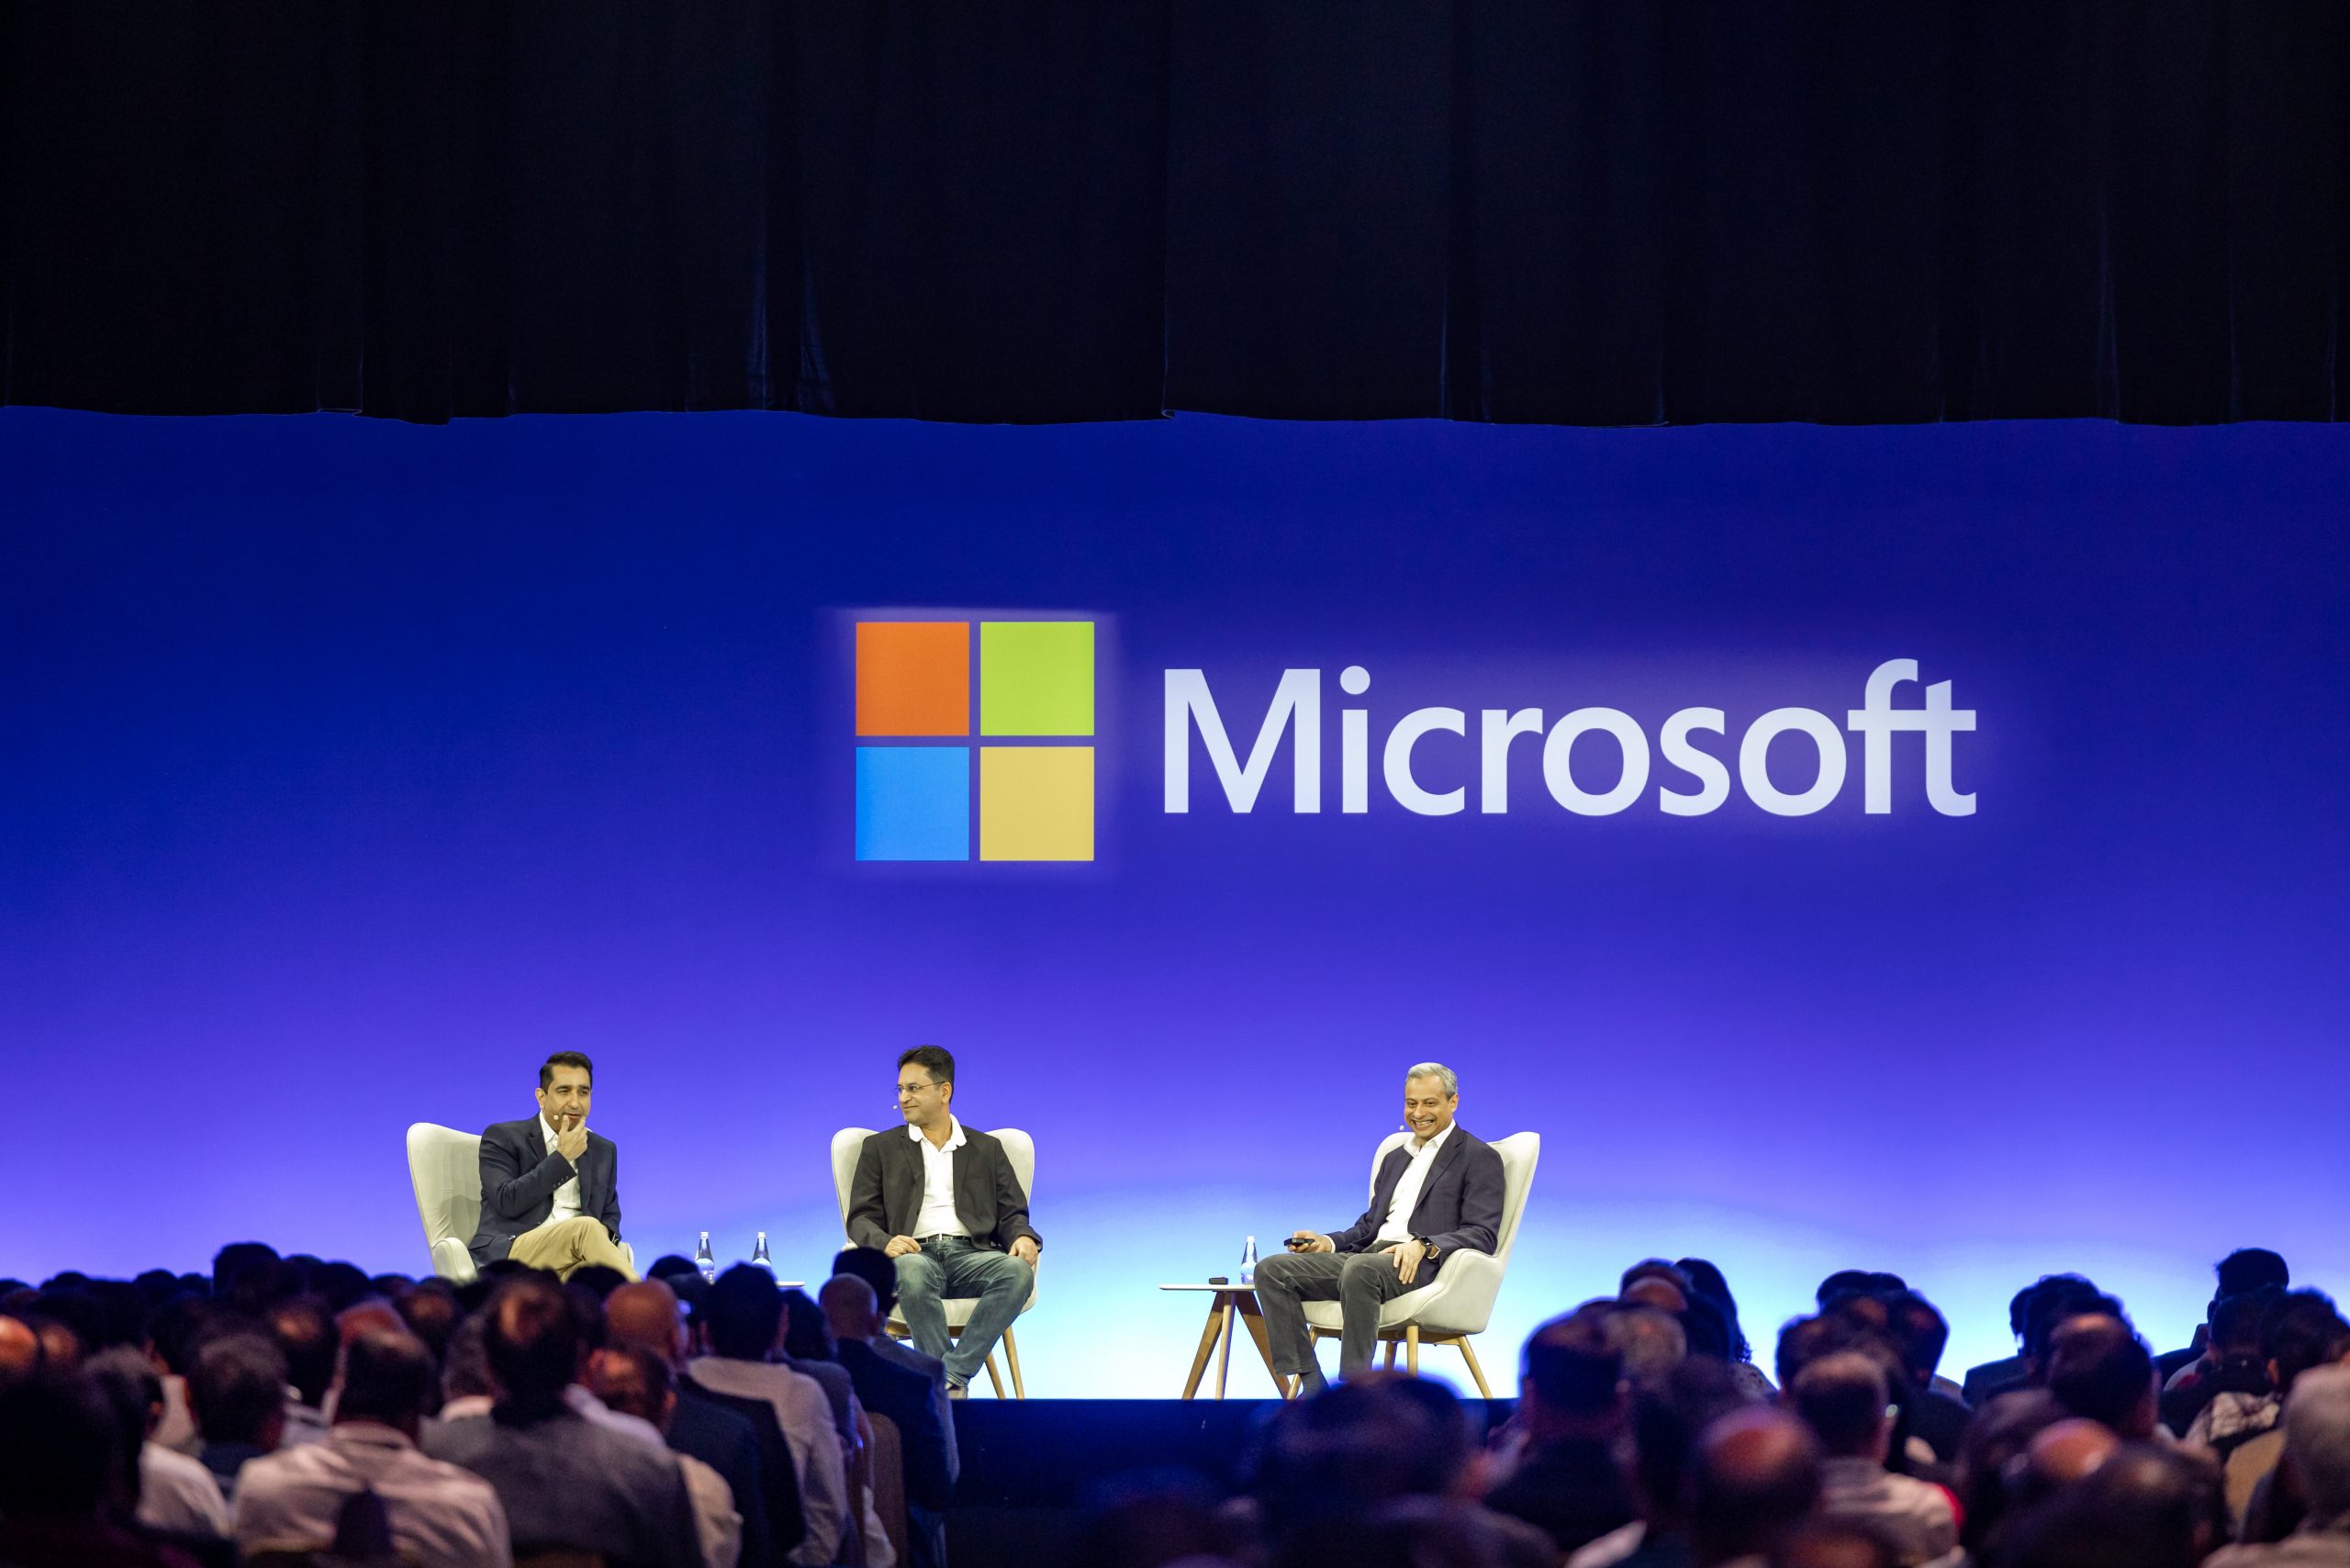 Three men in a panel on stage with Microsoft logo in the background